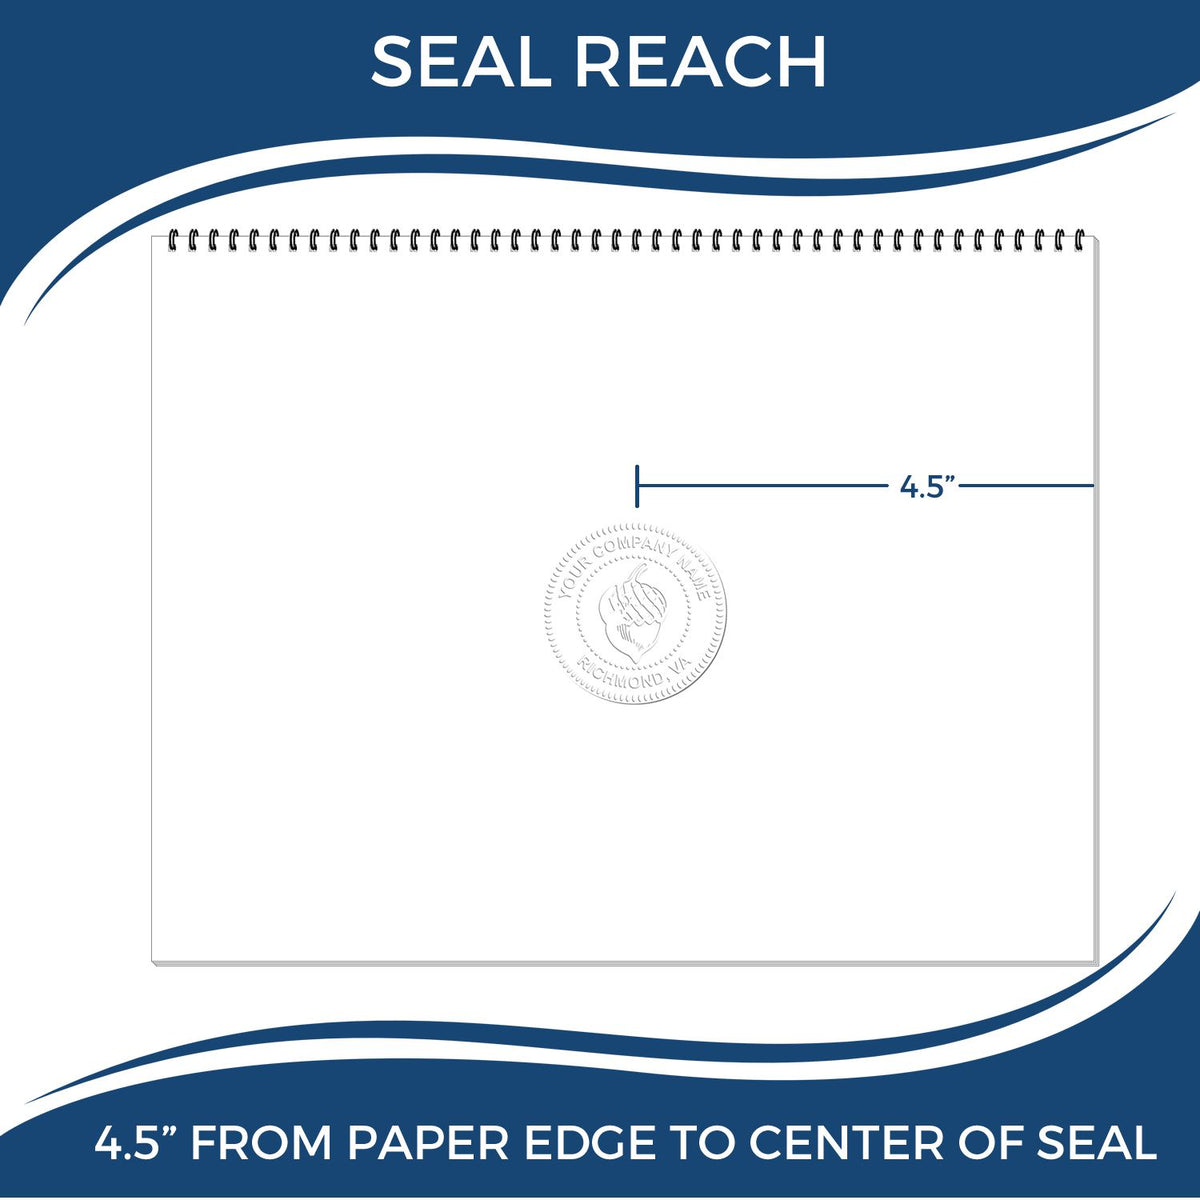 An infographic showing the seal reach which is represented by a ruler and a miniature seal image of the Extended Long Reach Colorado Architect Seal Embosser